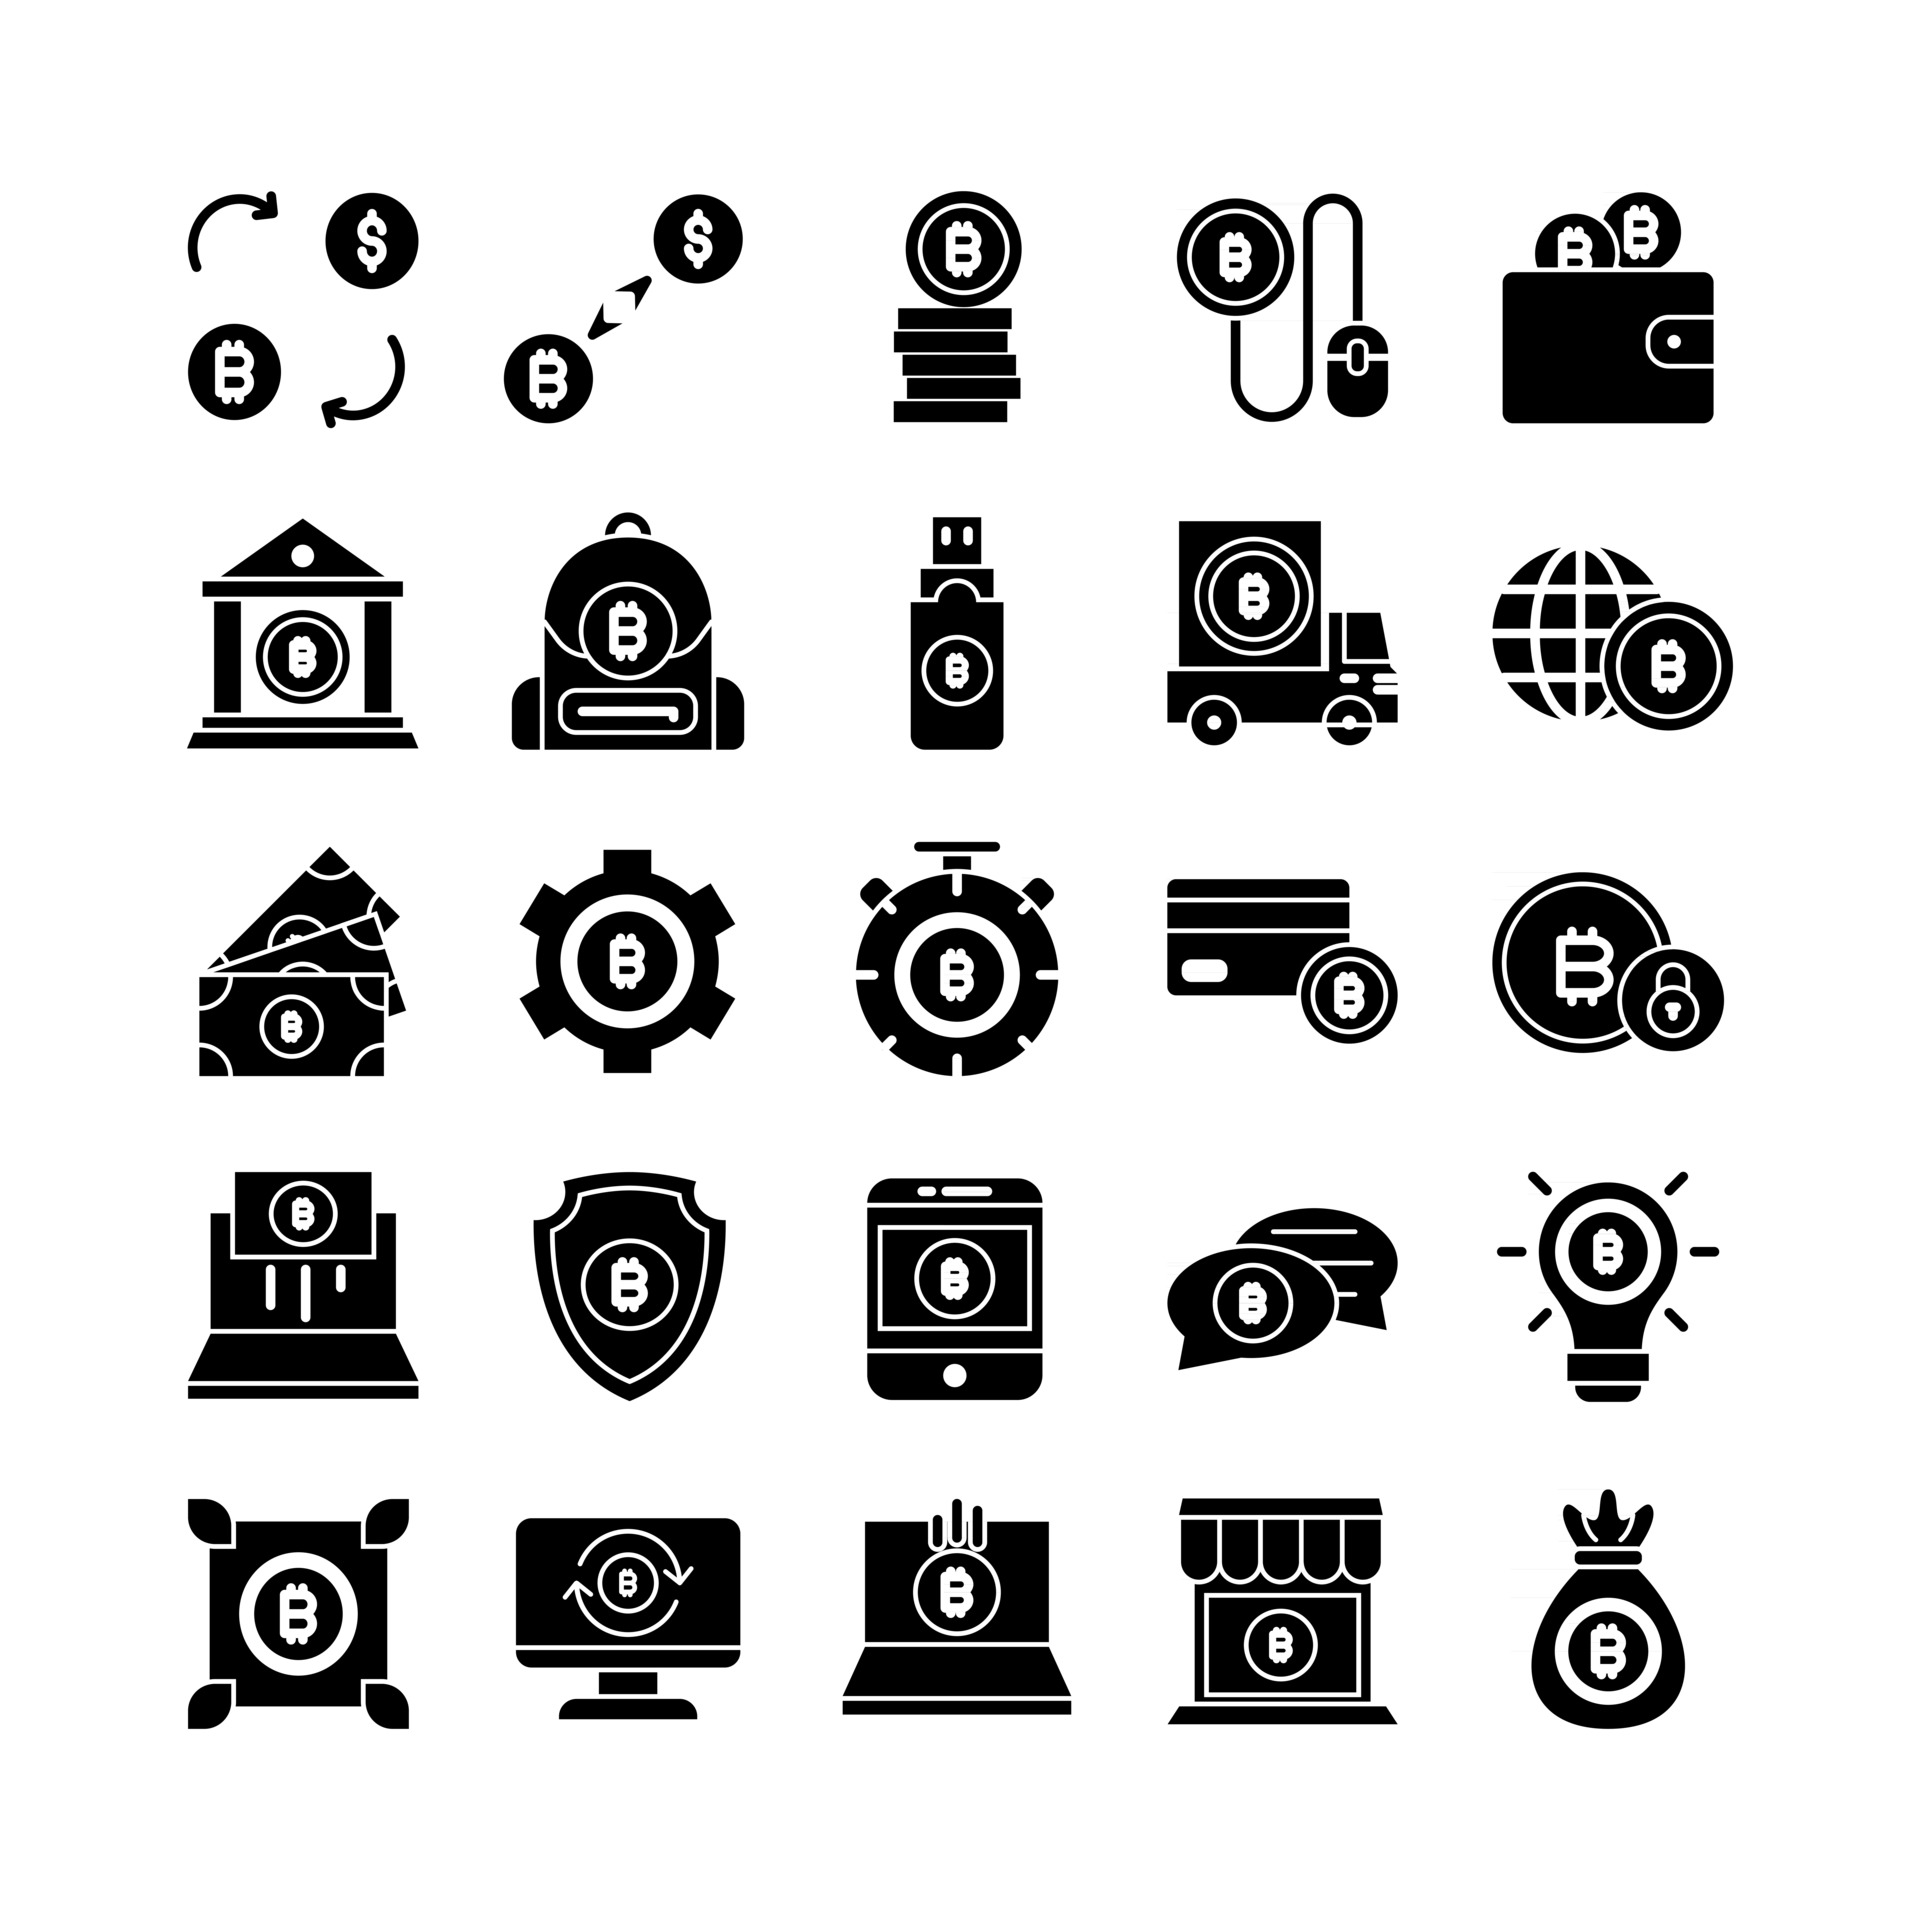 The Free Cryptocurrency Icon Set (50 Icons in SVG, AI & PNG Formats)